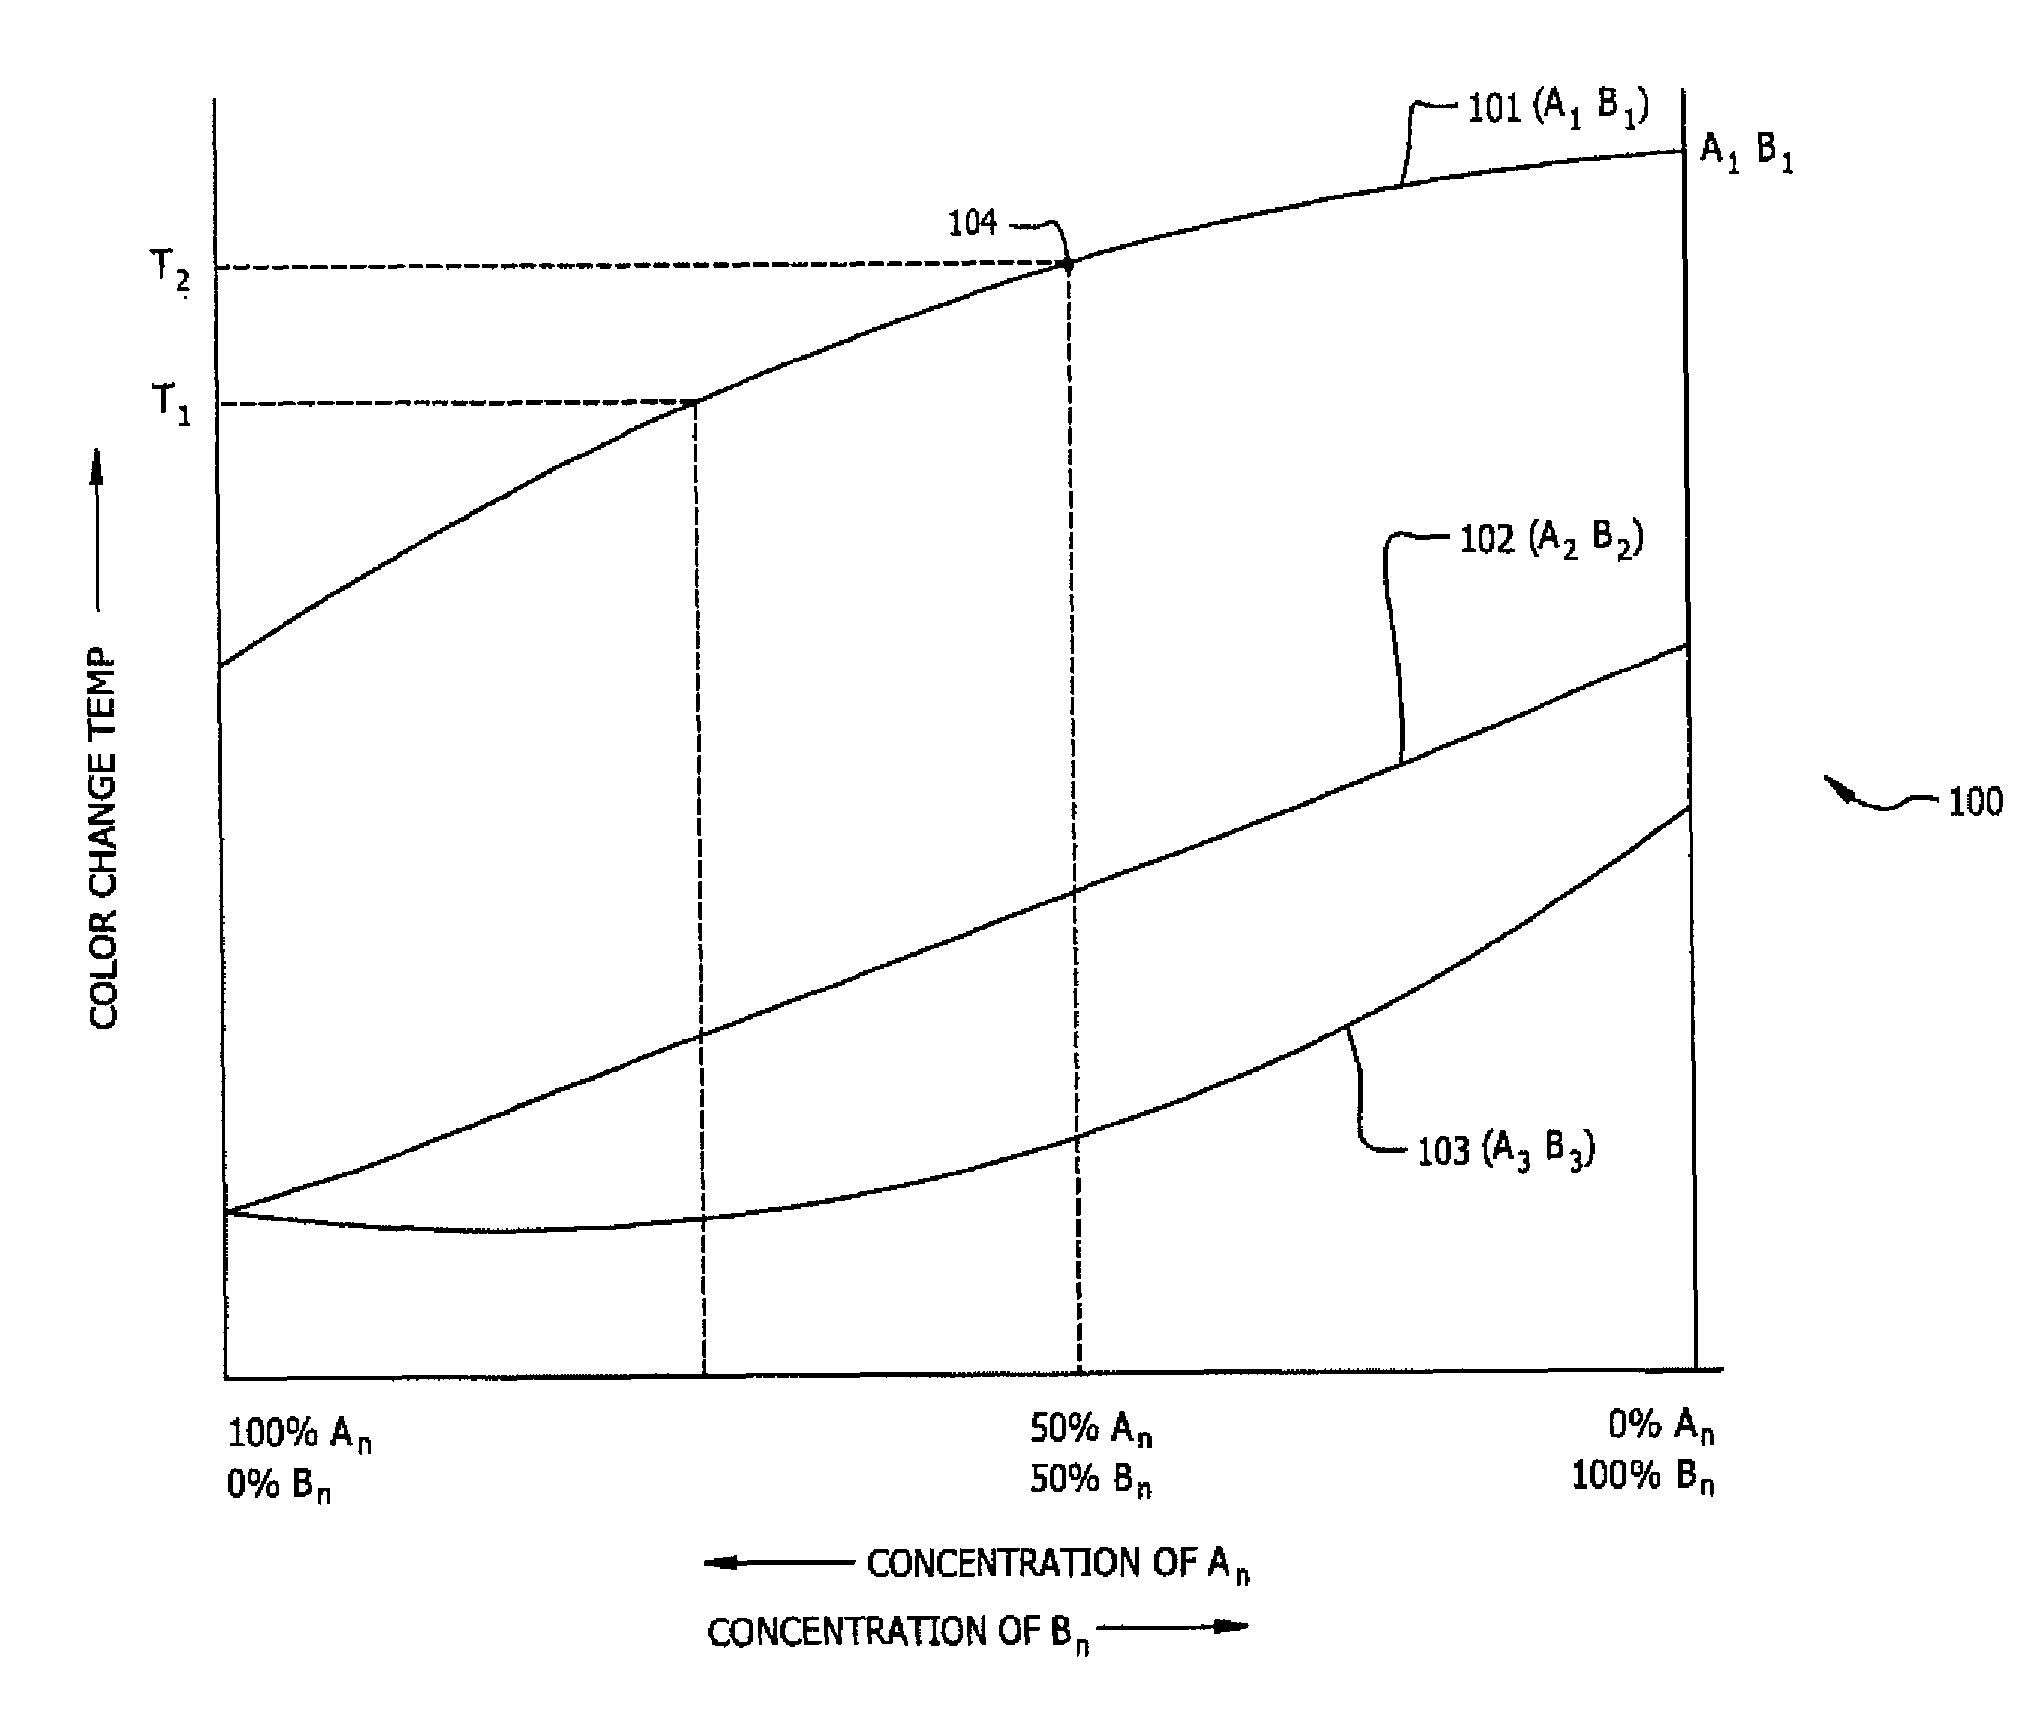 Co-topo-polymeric compositions, devices and systems for controlling threshold and delay activation sensitivities